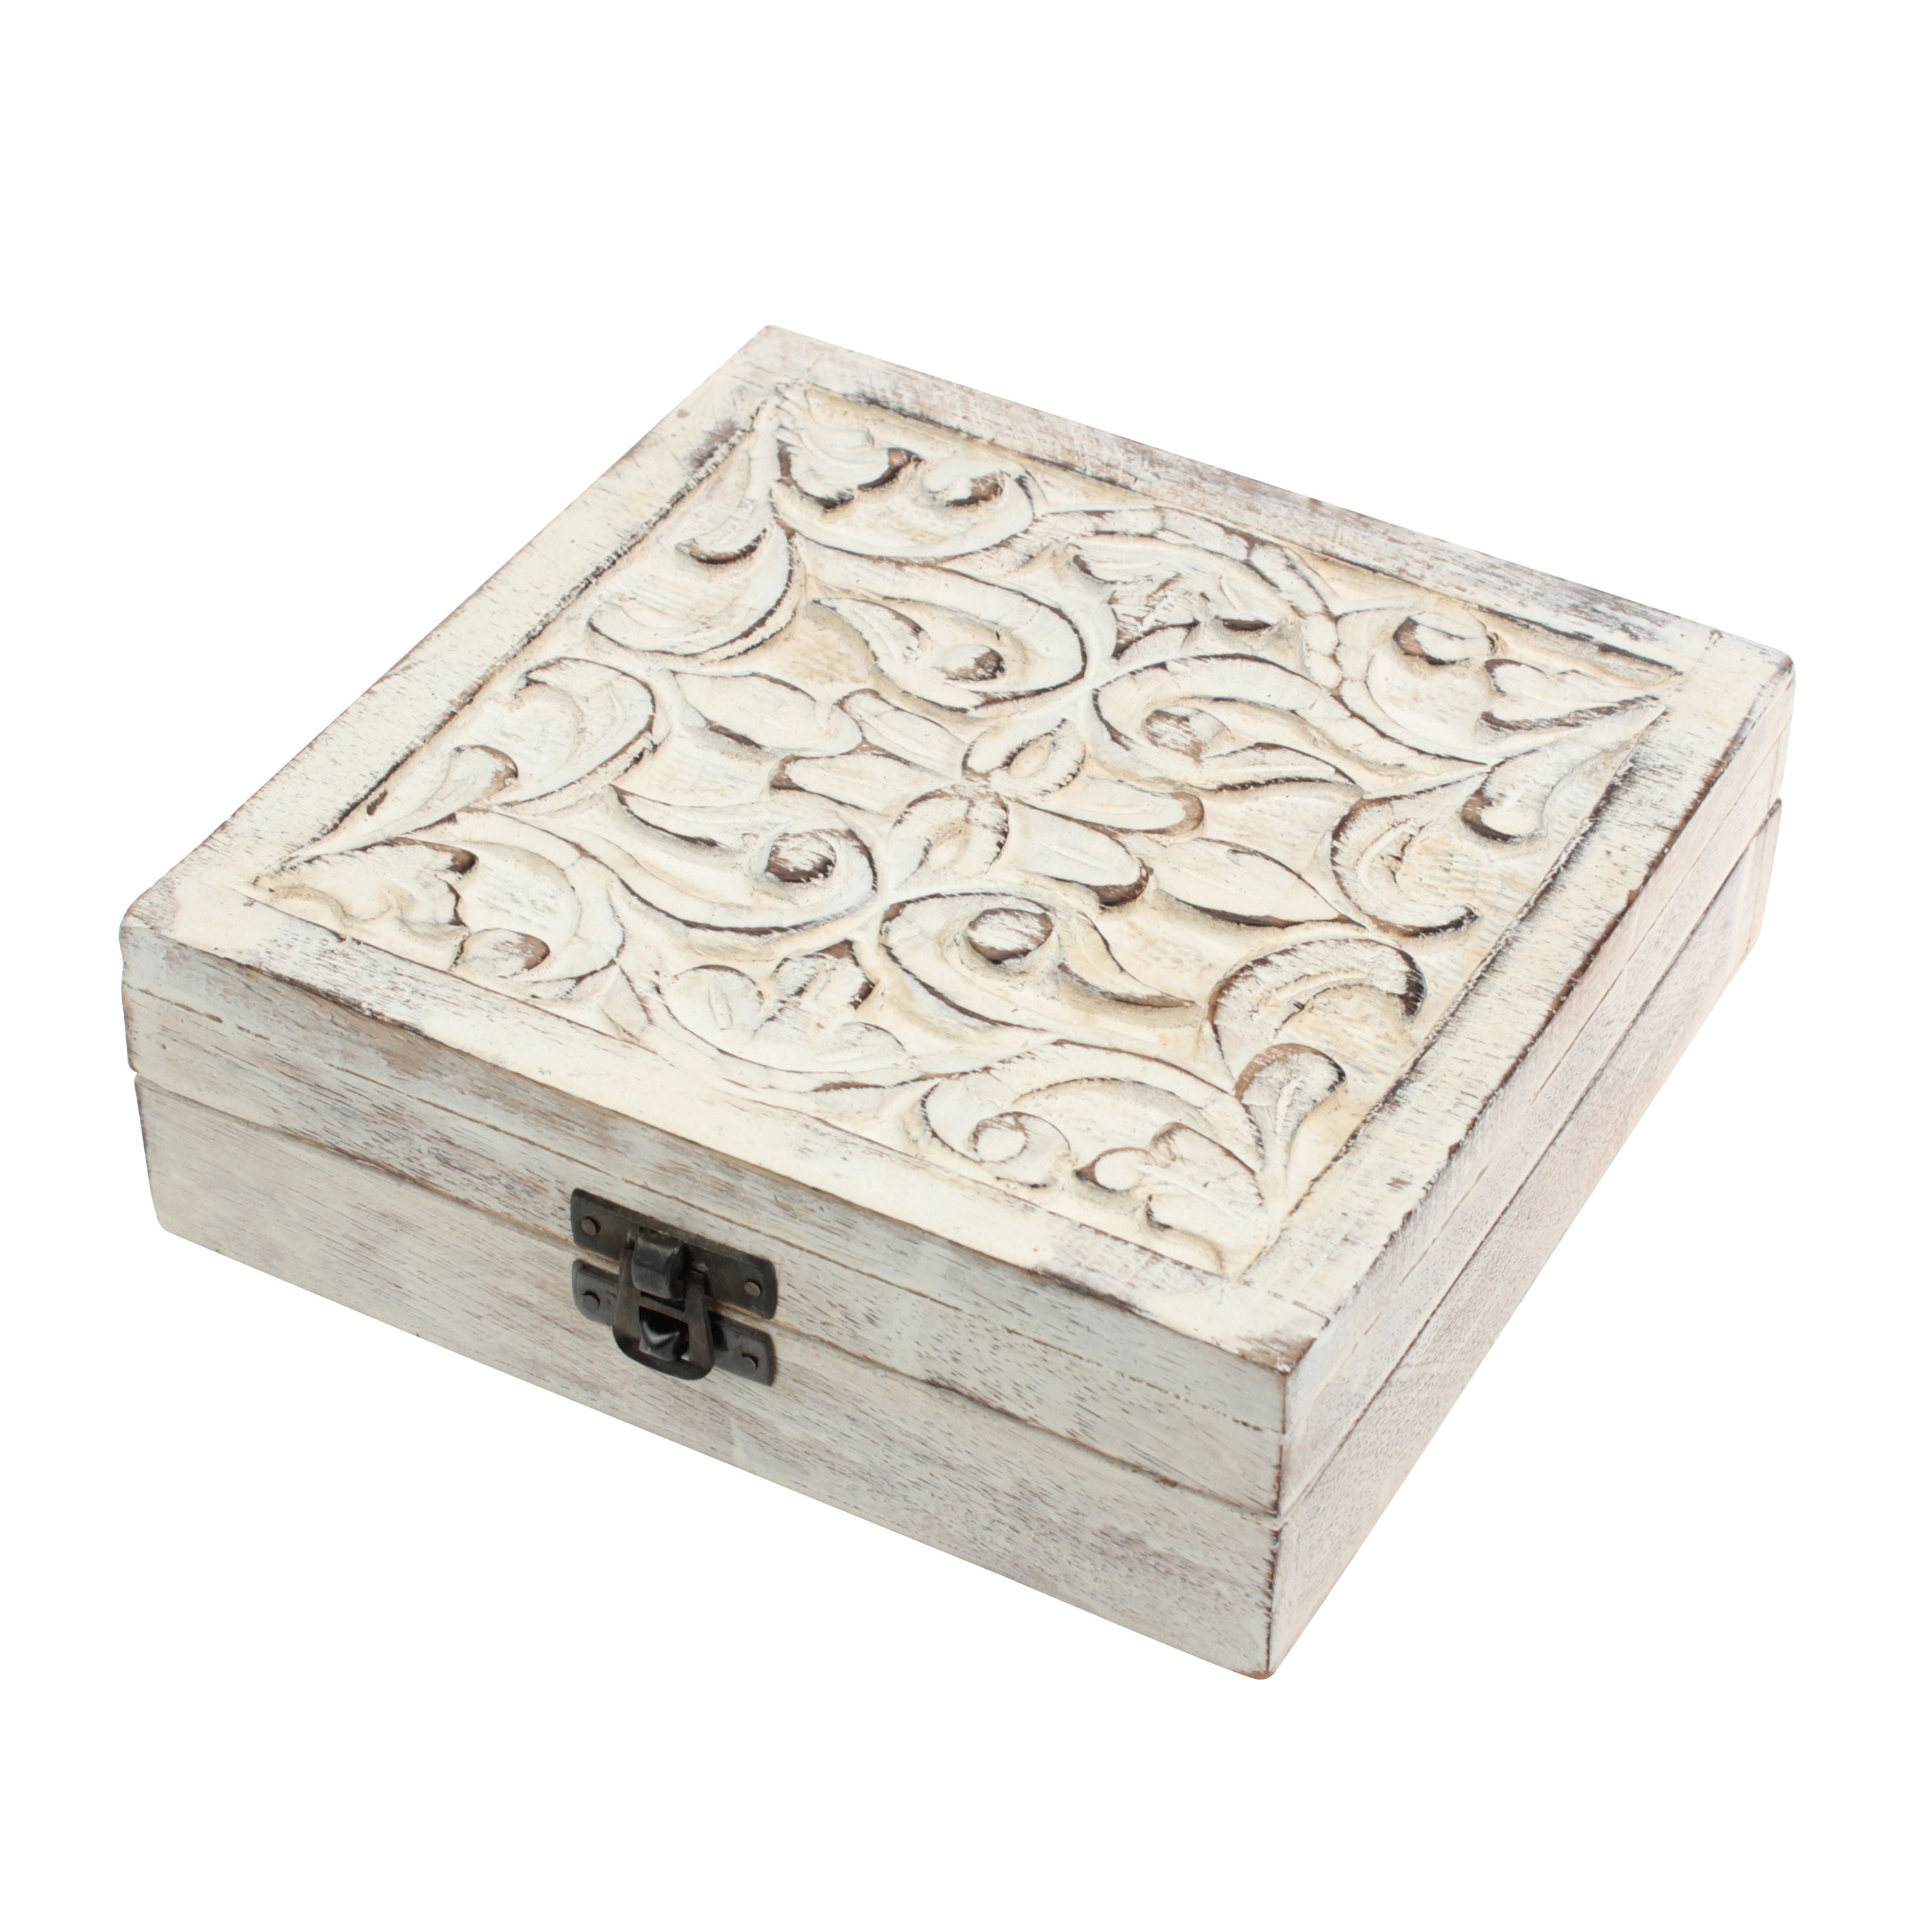 Worn White Wood Box with Hinged Lid and Carved Fillegry Details